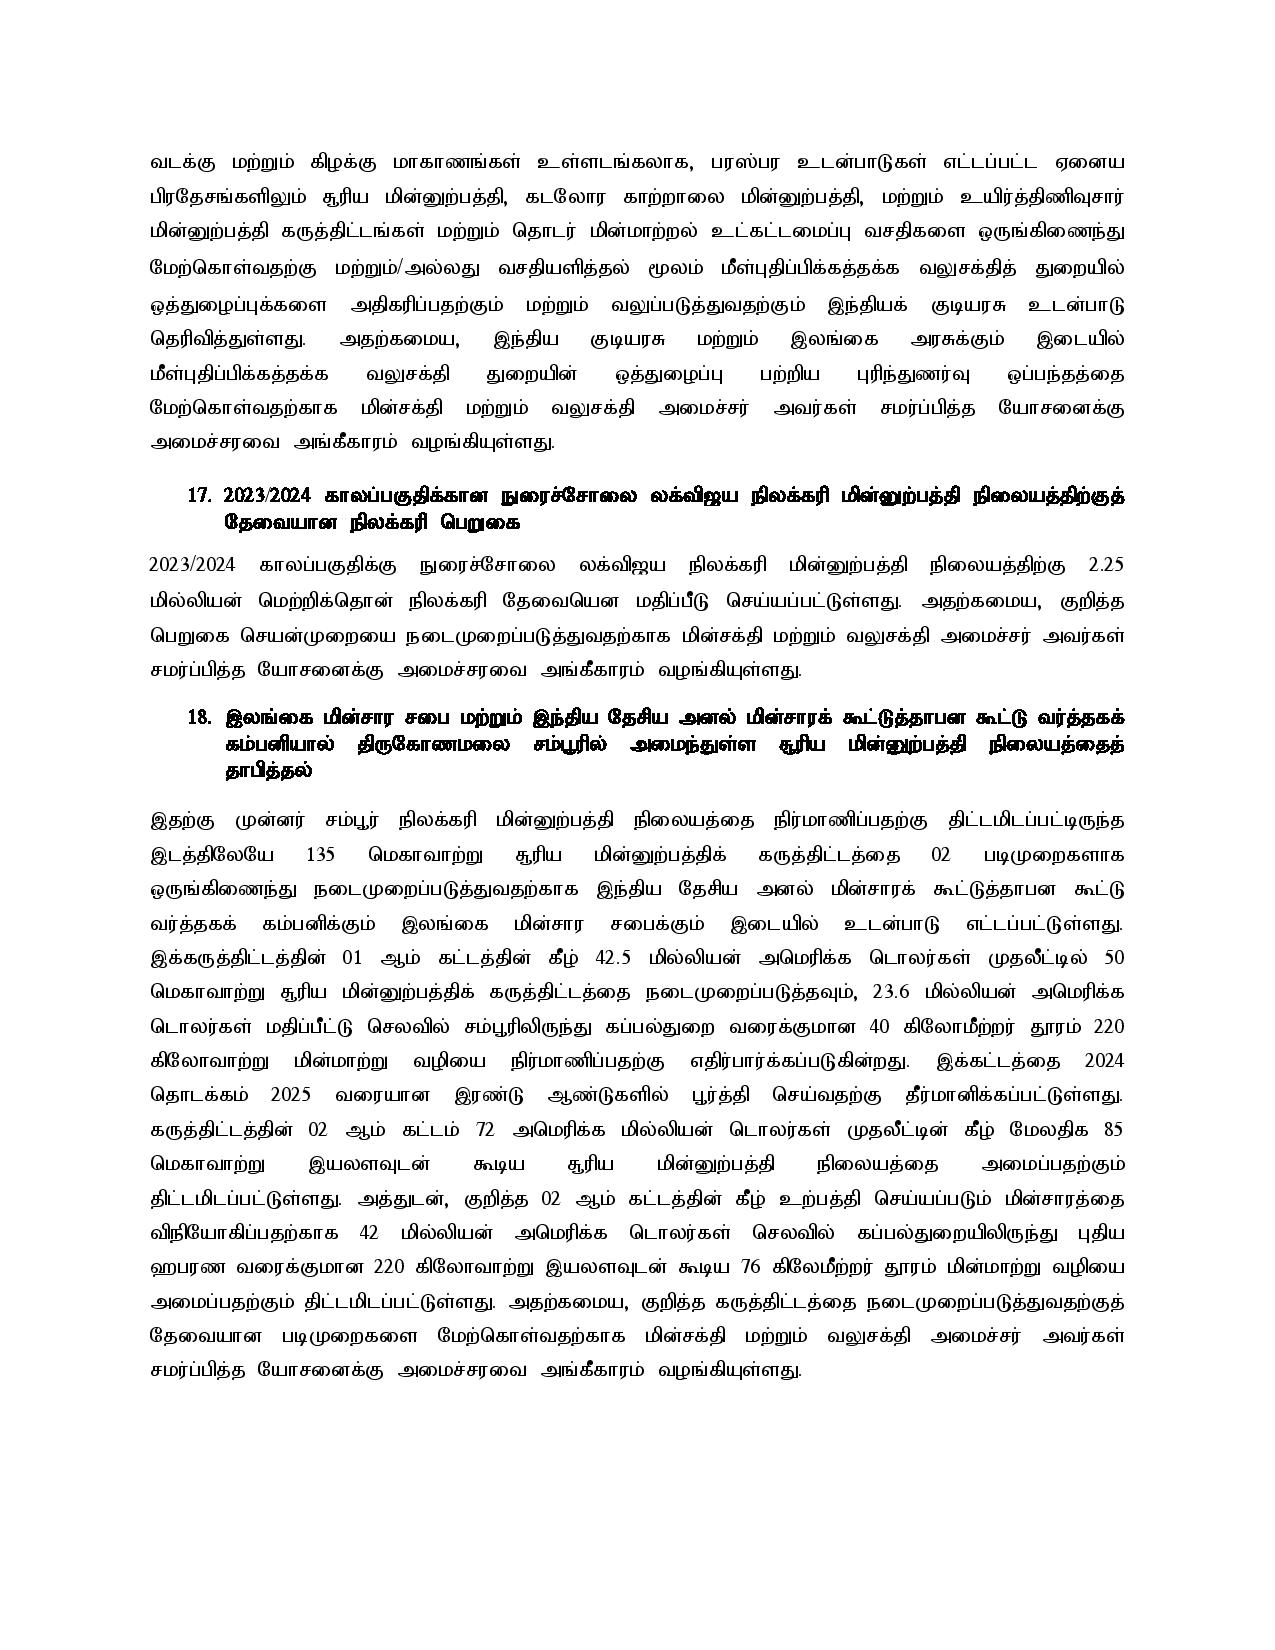 Cabinet Decisions on 27.03.2023 Tamil page 006